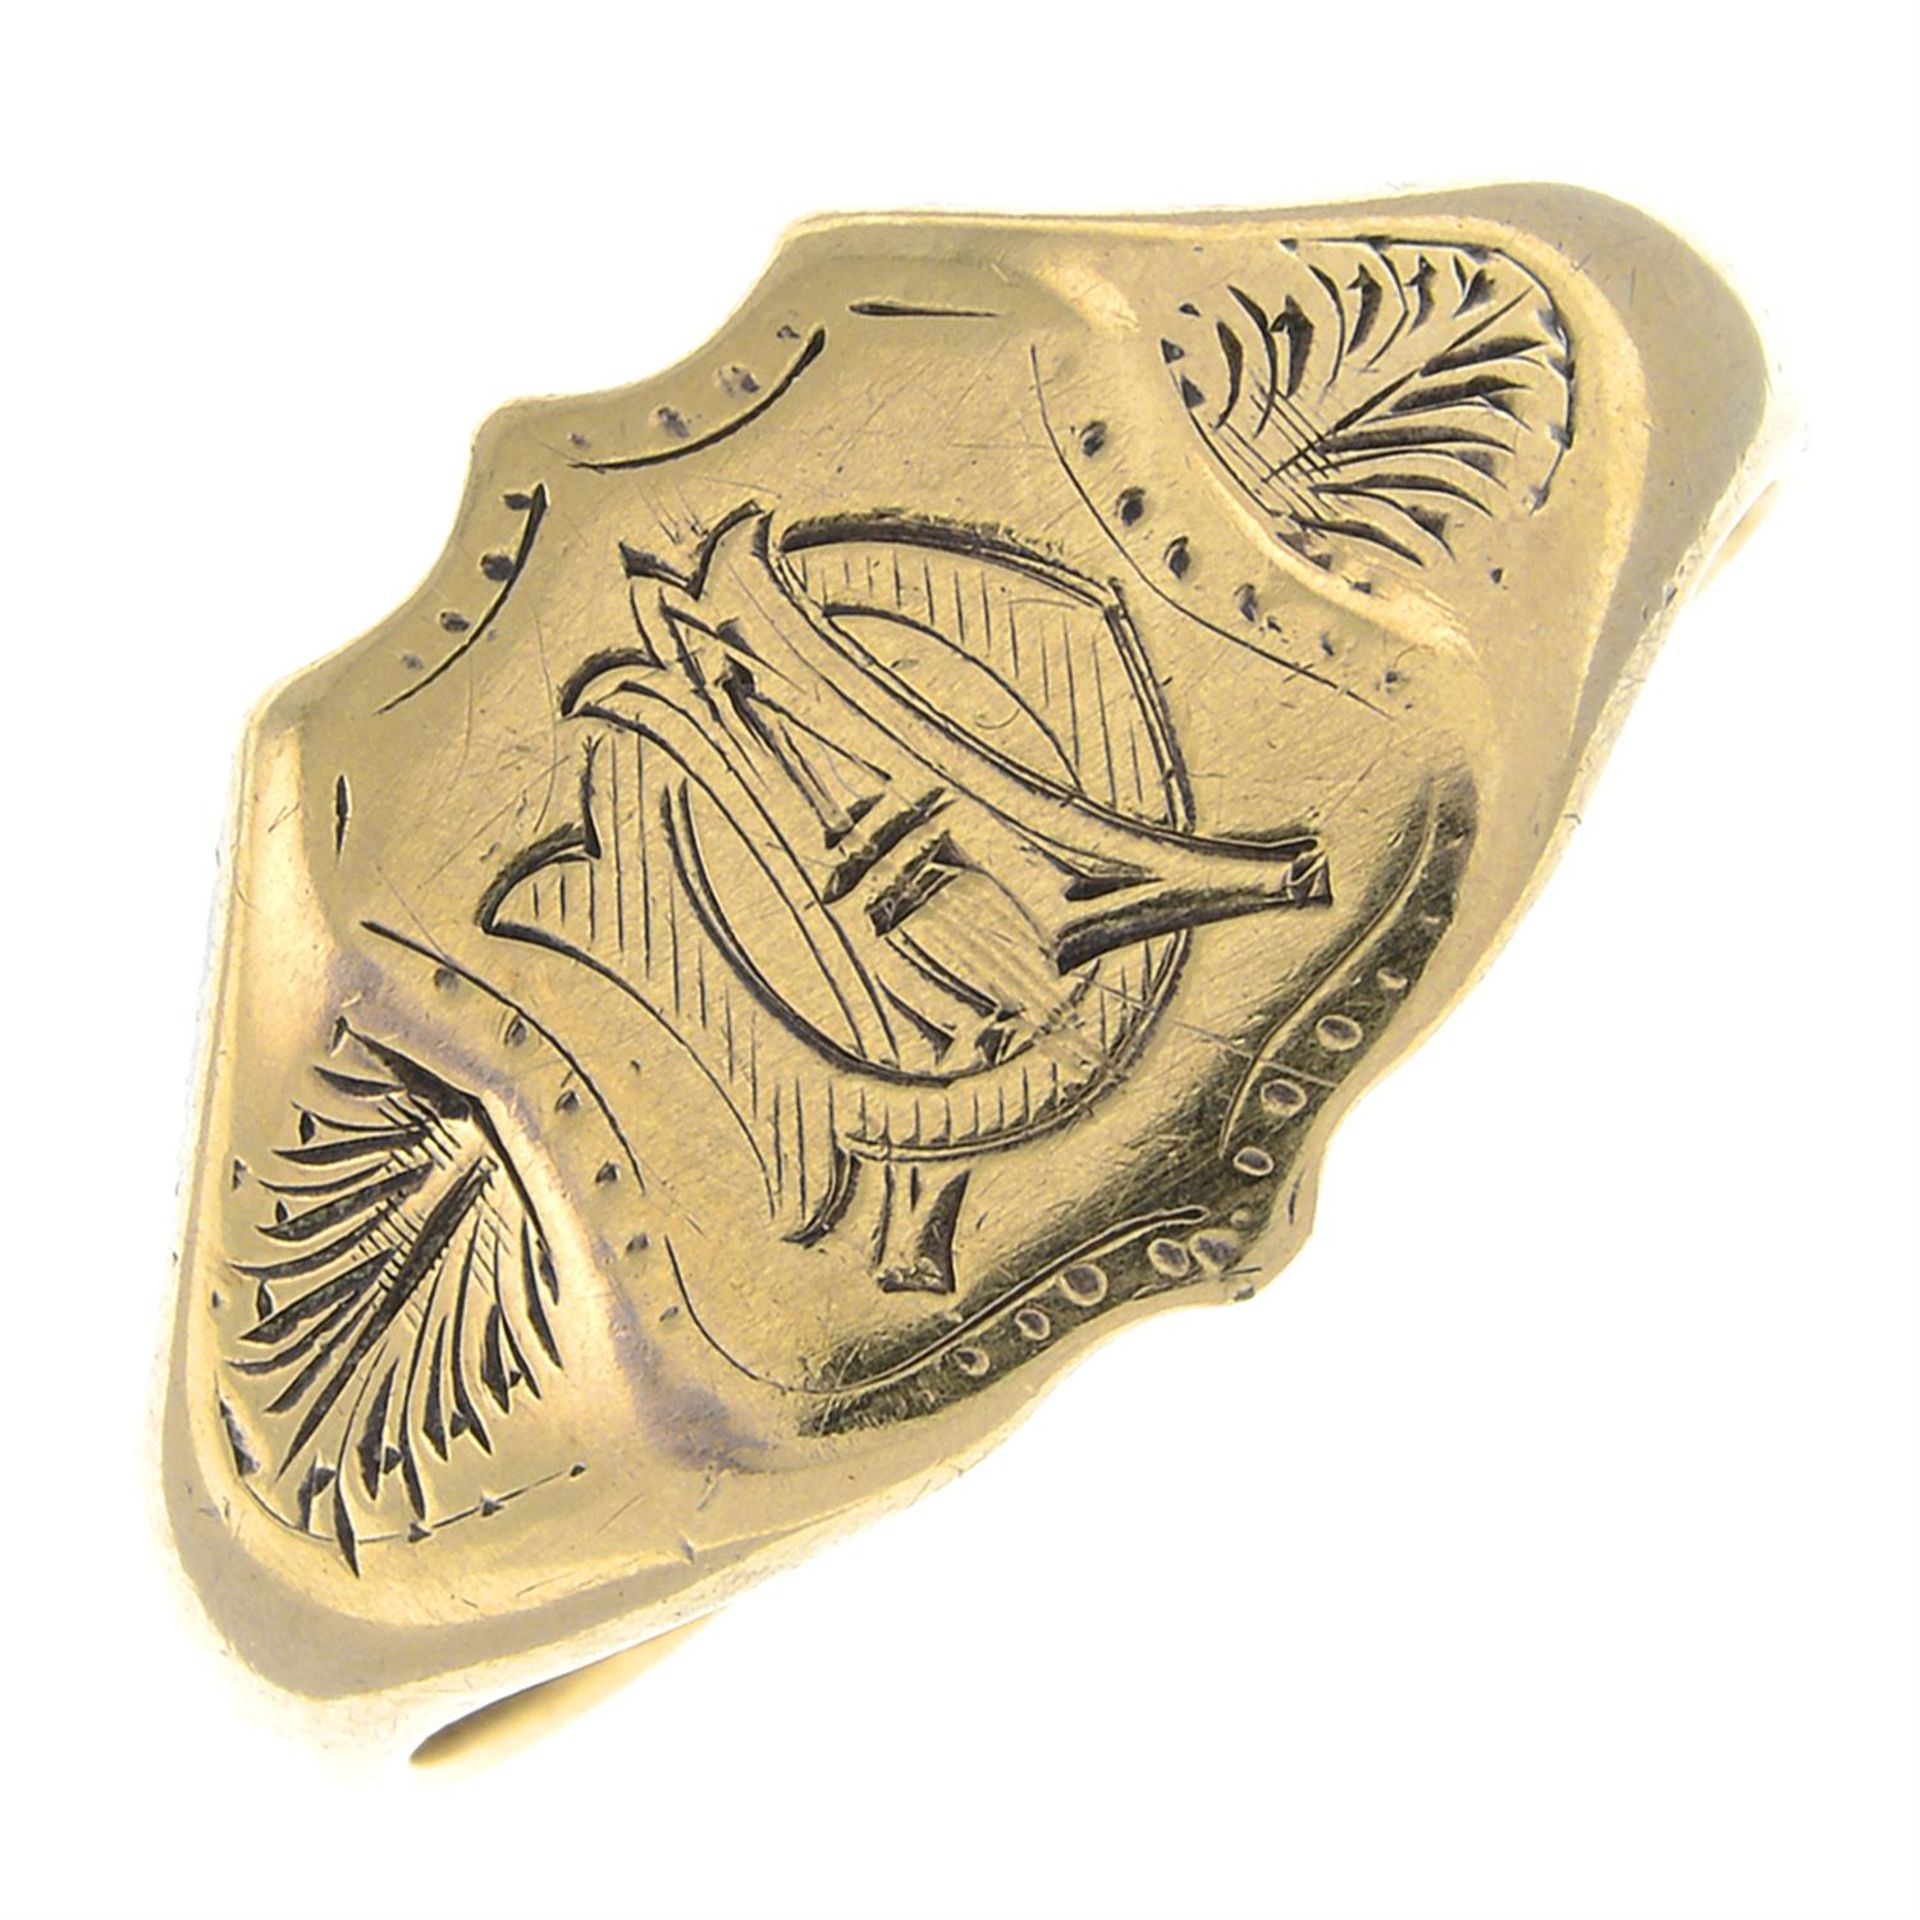 A 1970s 9ct gold monogram engraved signet ring.